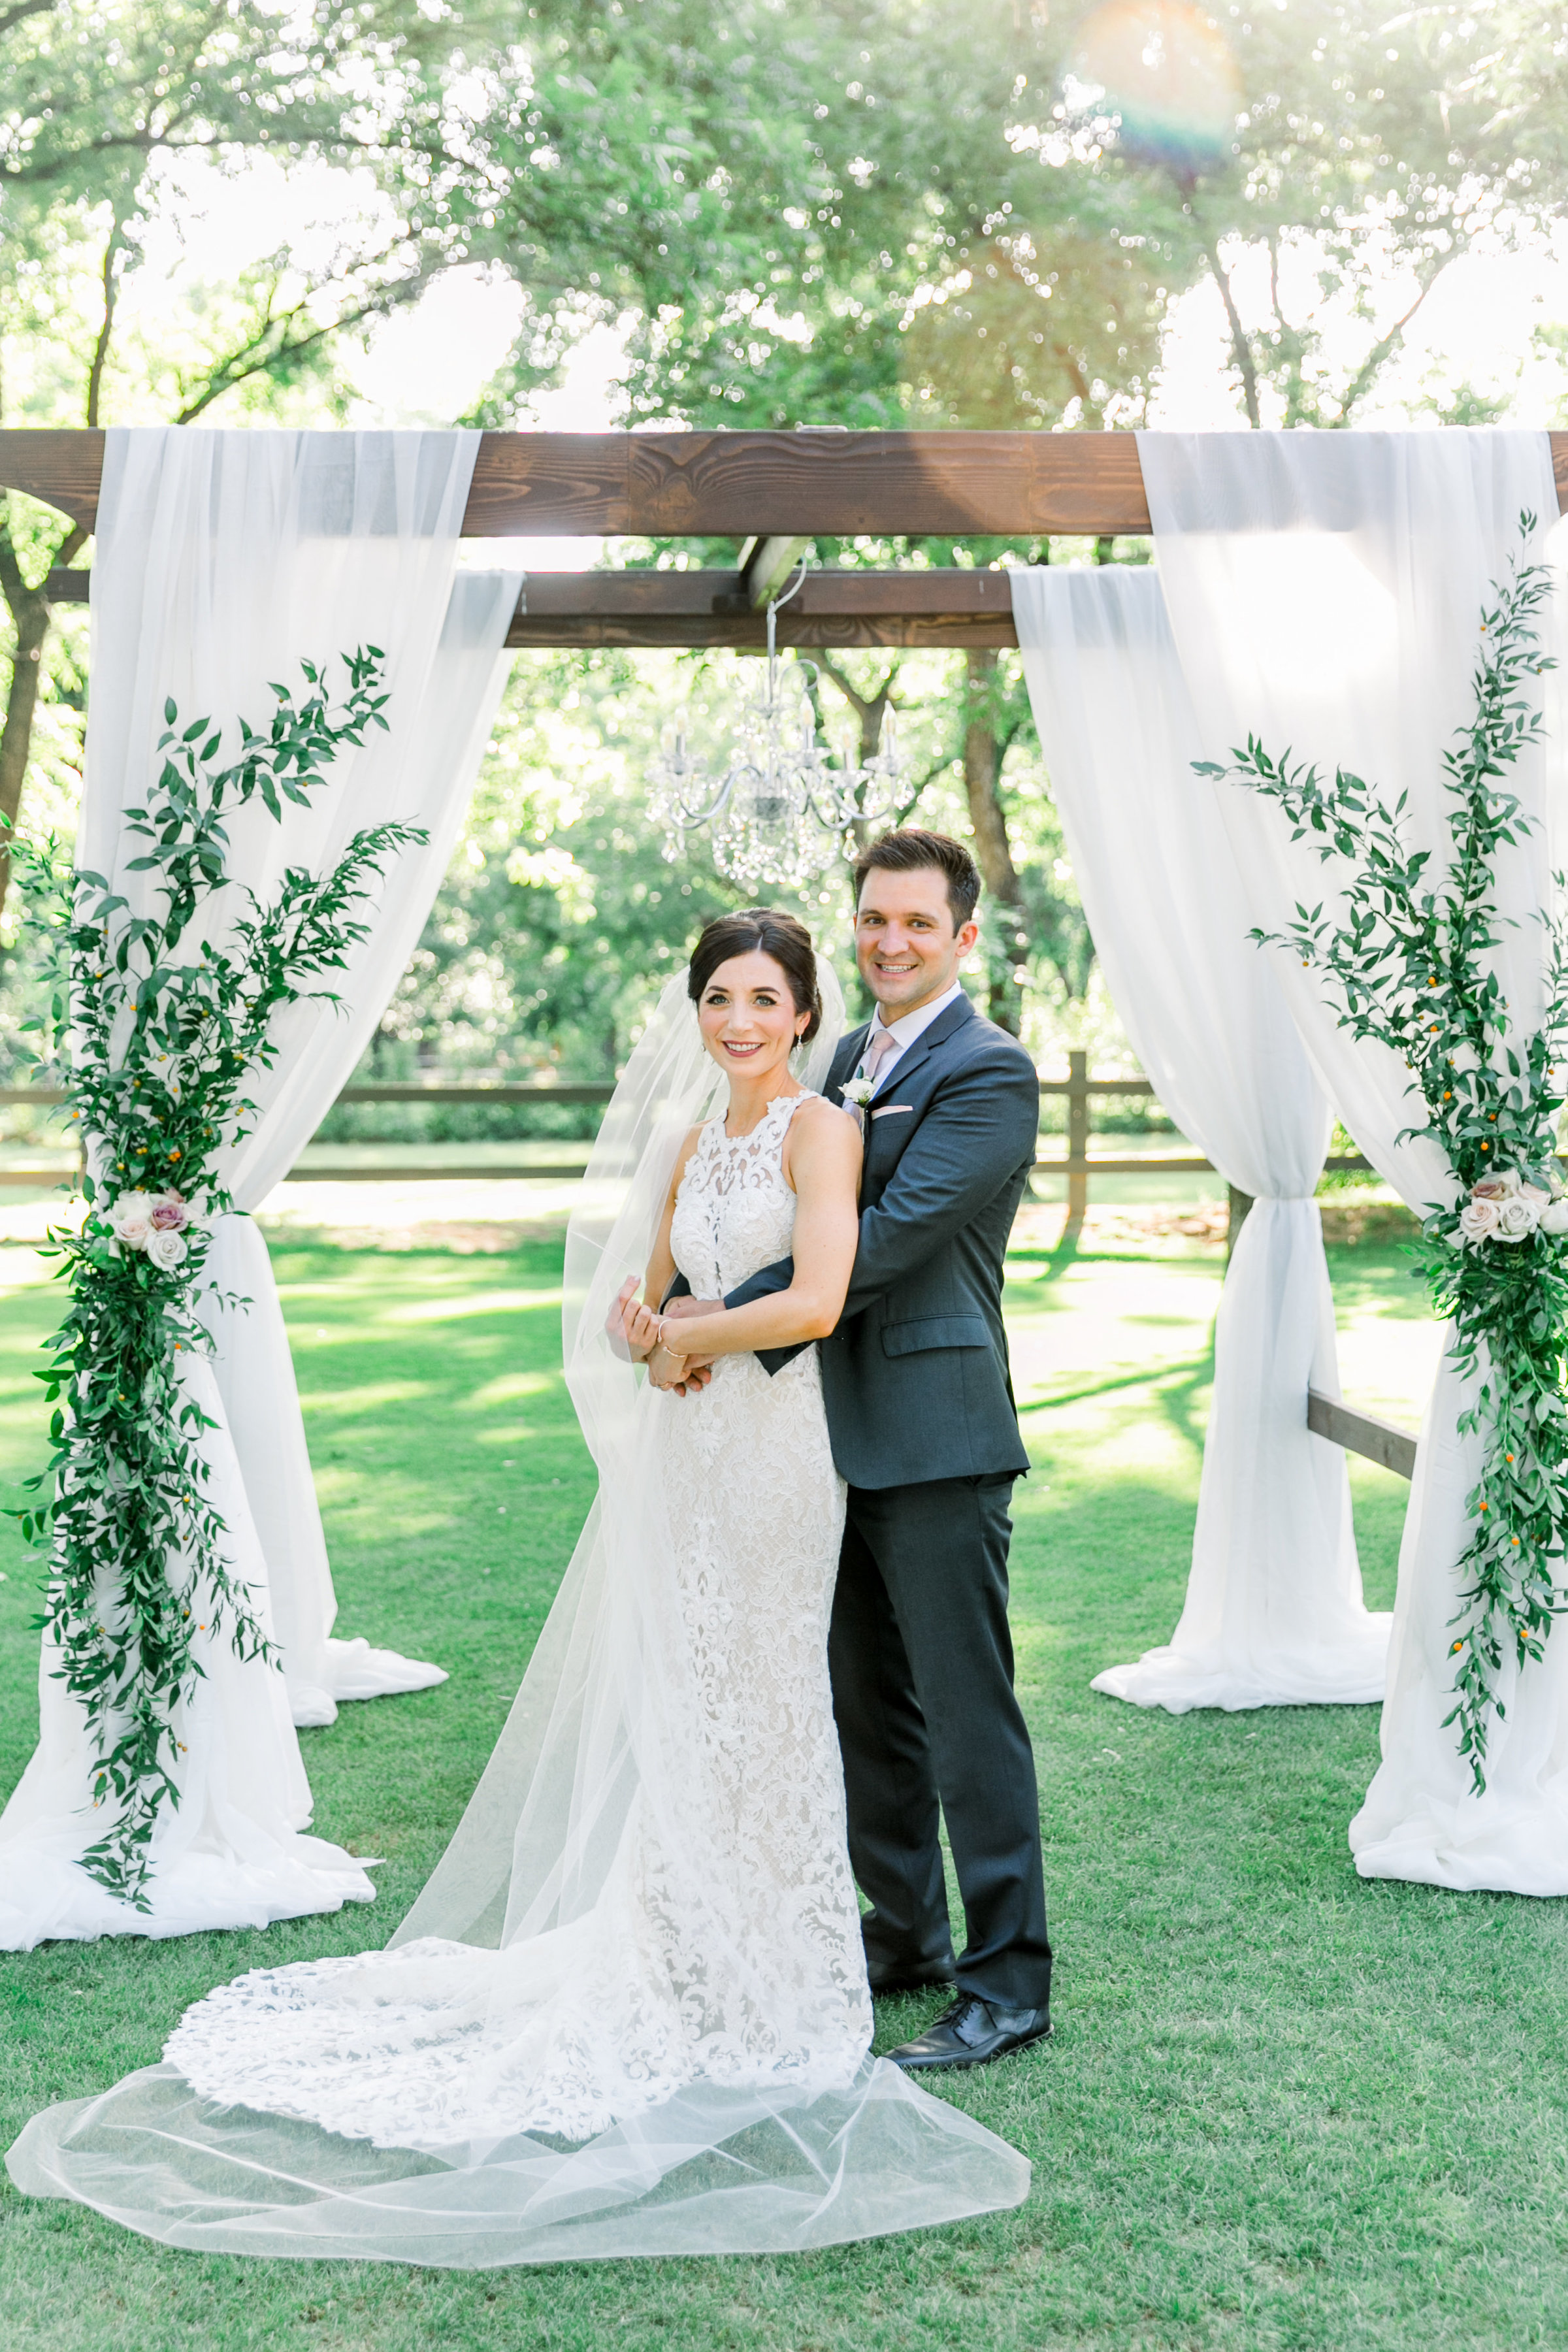 Karlie Colleen Photography - Venue At The Grove - Arizona Wedding - Maggie & Grant -65